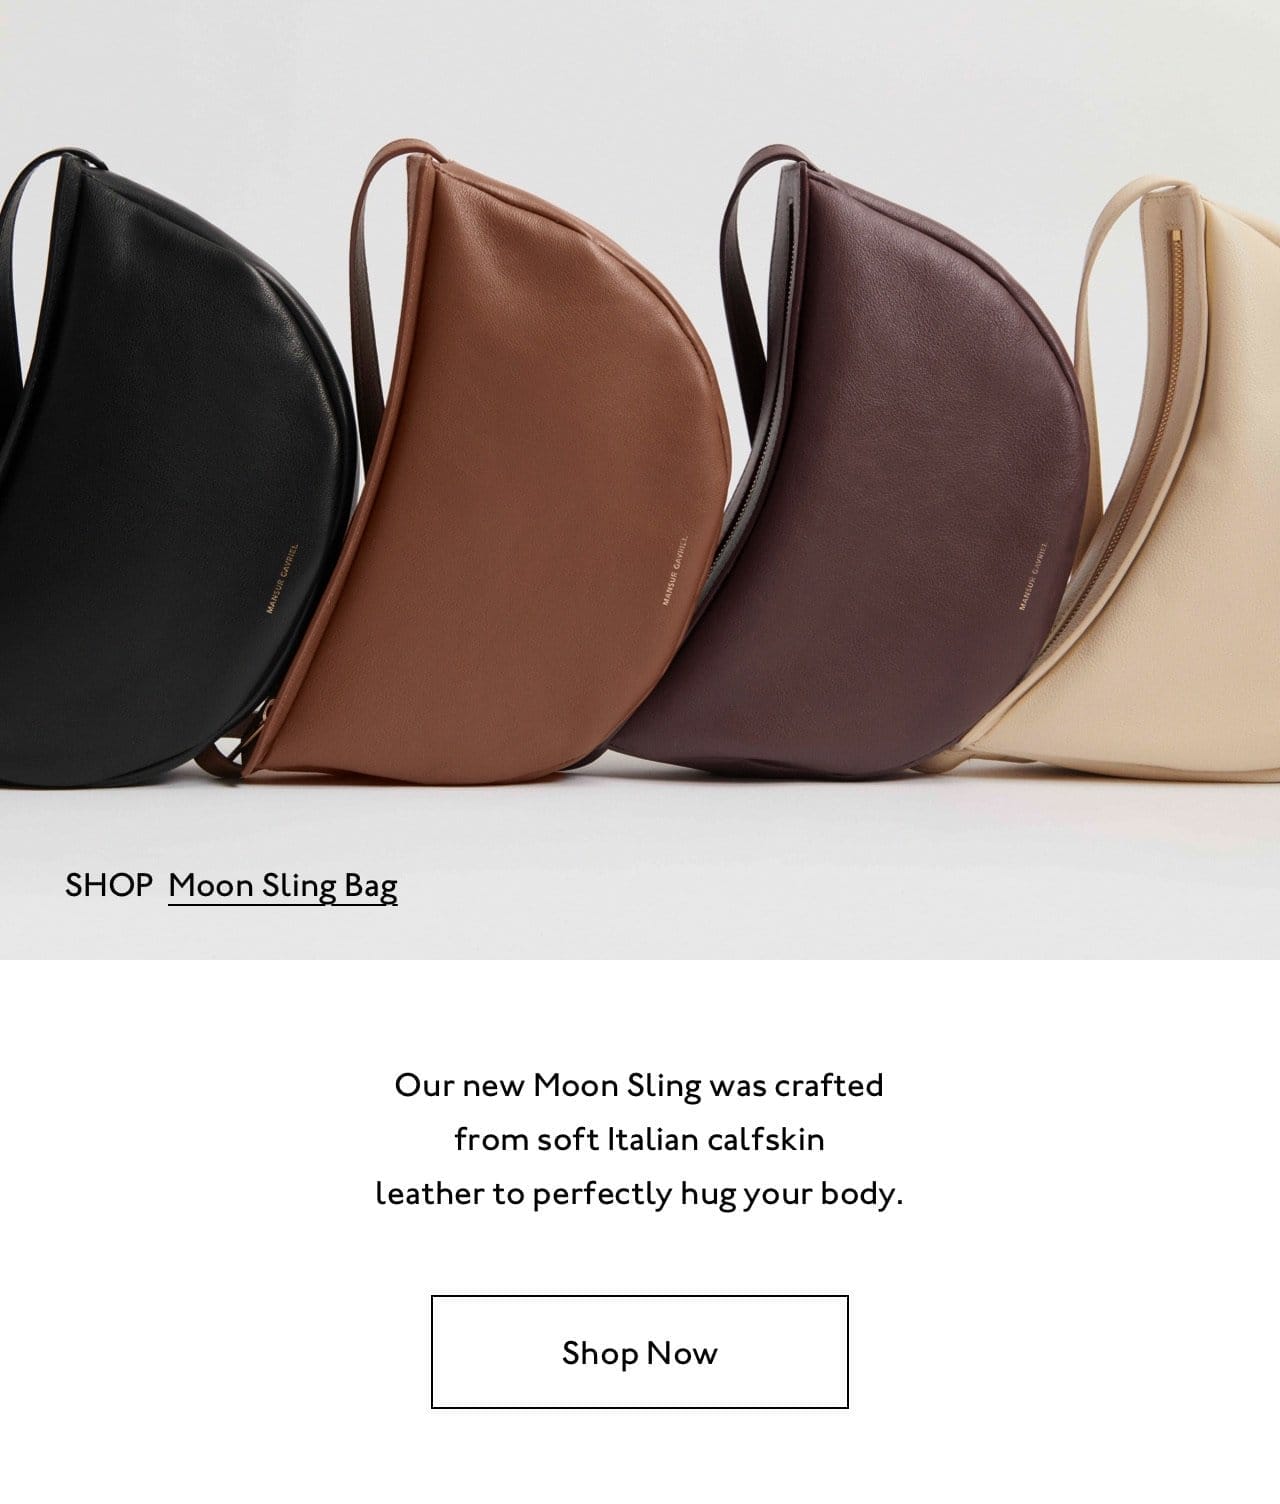 Our new Moon Sling was crafted from soft Italian calfskin leather to perfectly hug your body.